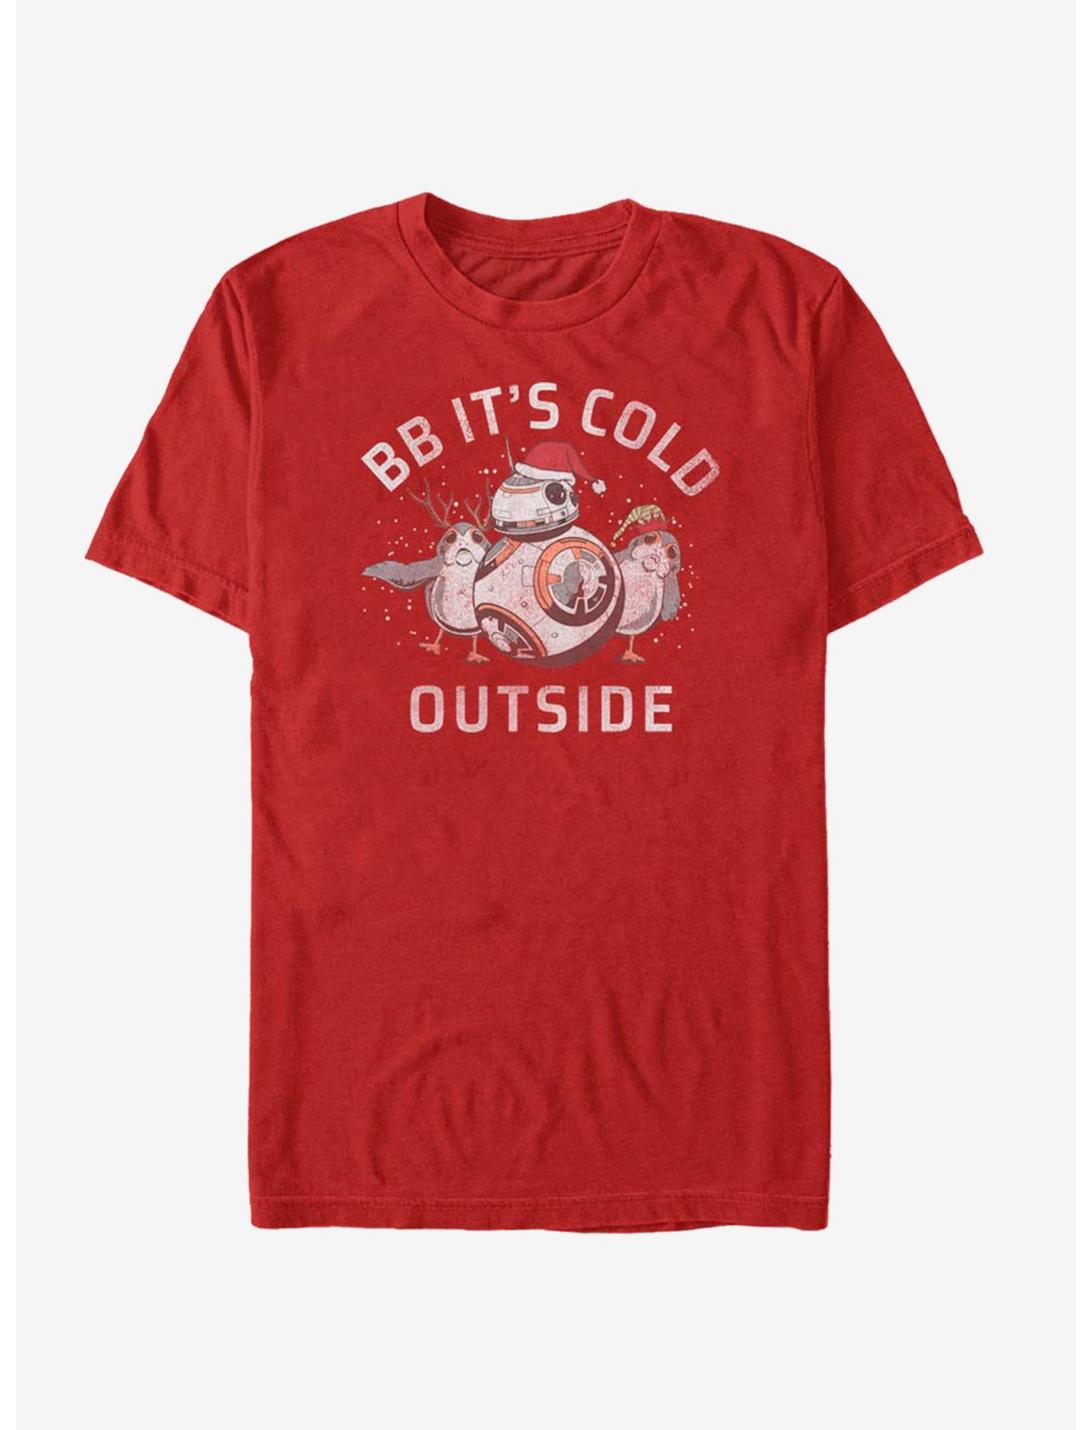 Star Wars BB It's Cold T-Shirt, RED, hi-res